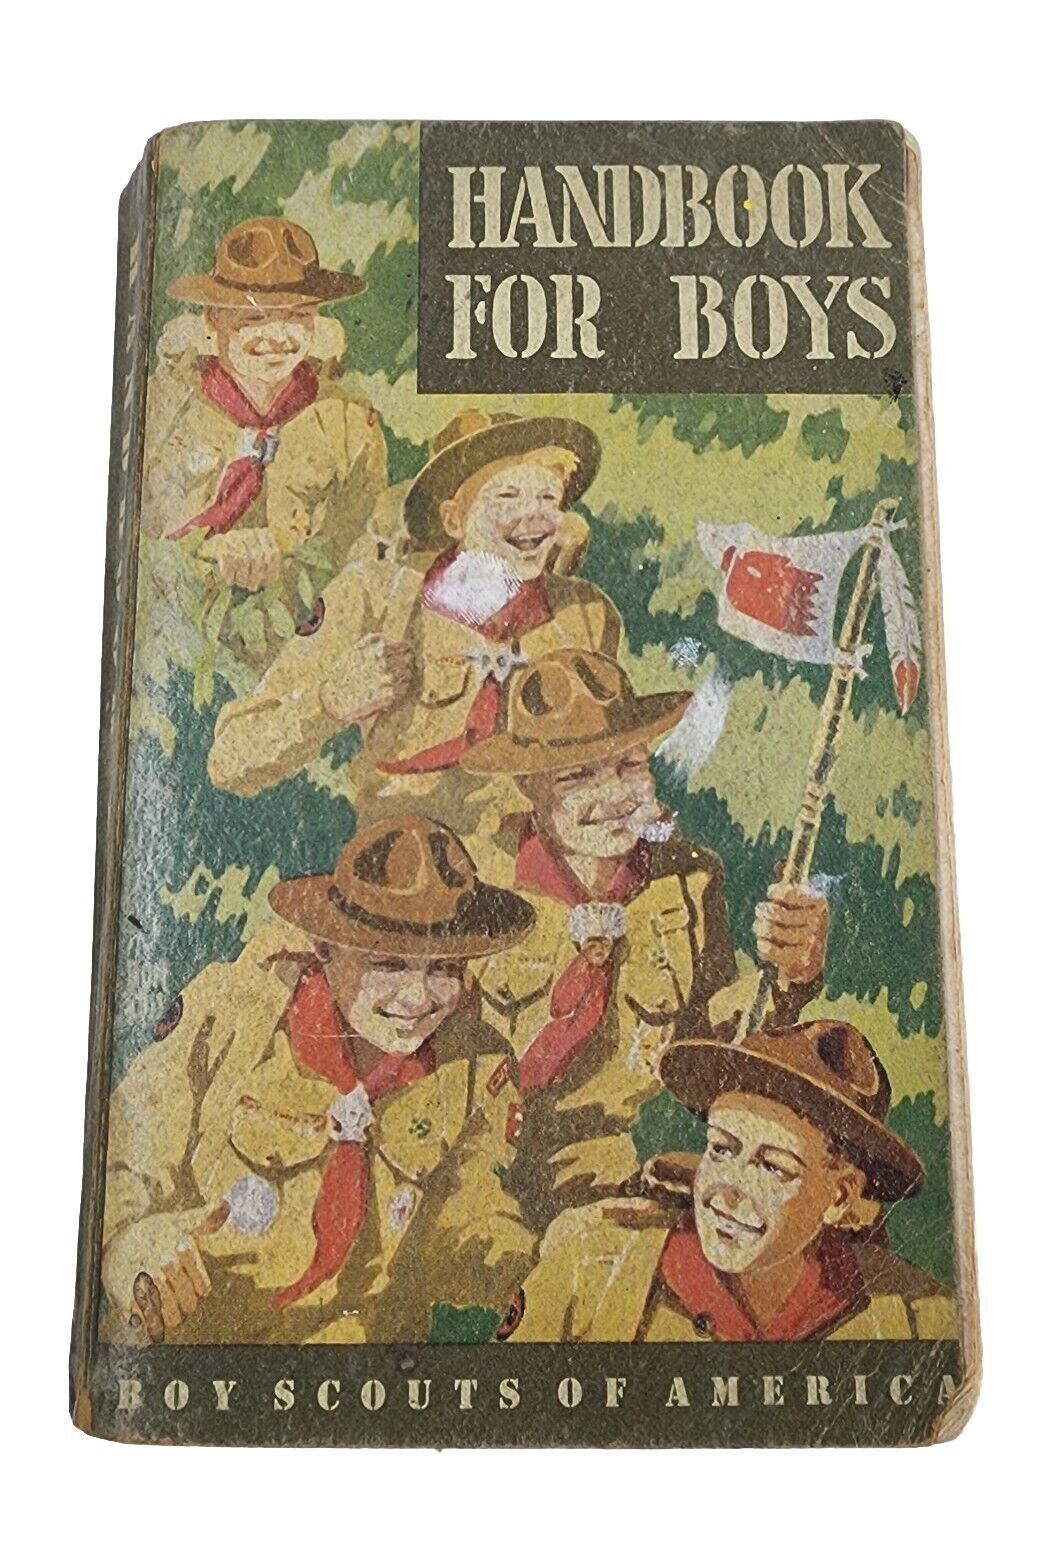 Vintage Boy Scouts, Handbook for Boys 1949, Great Advertisements in the book